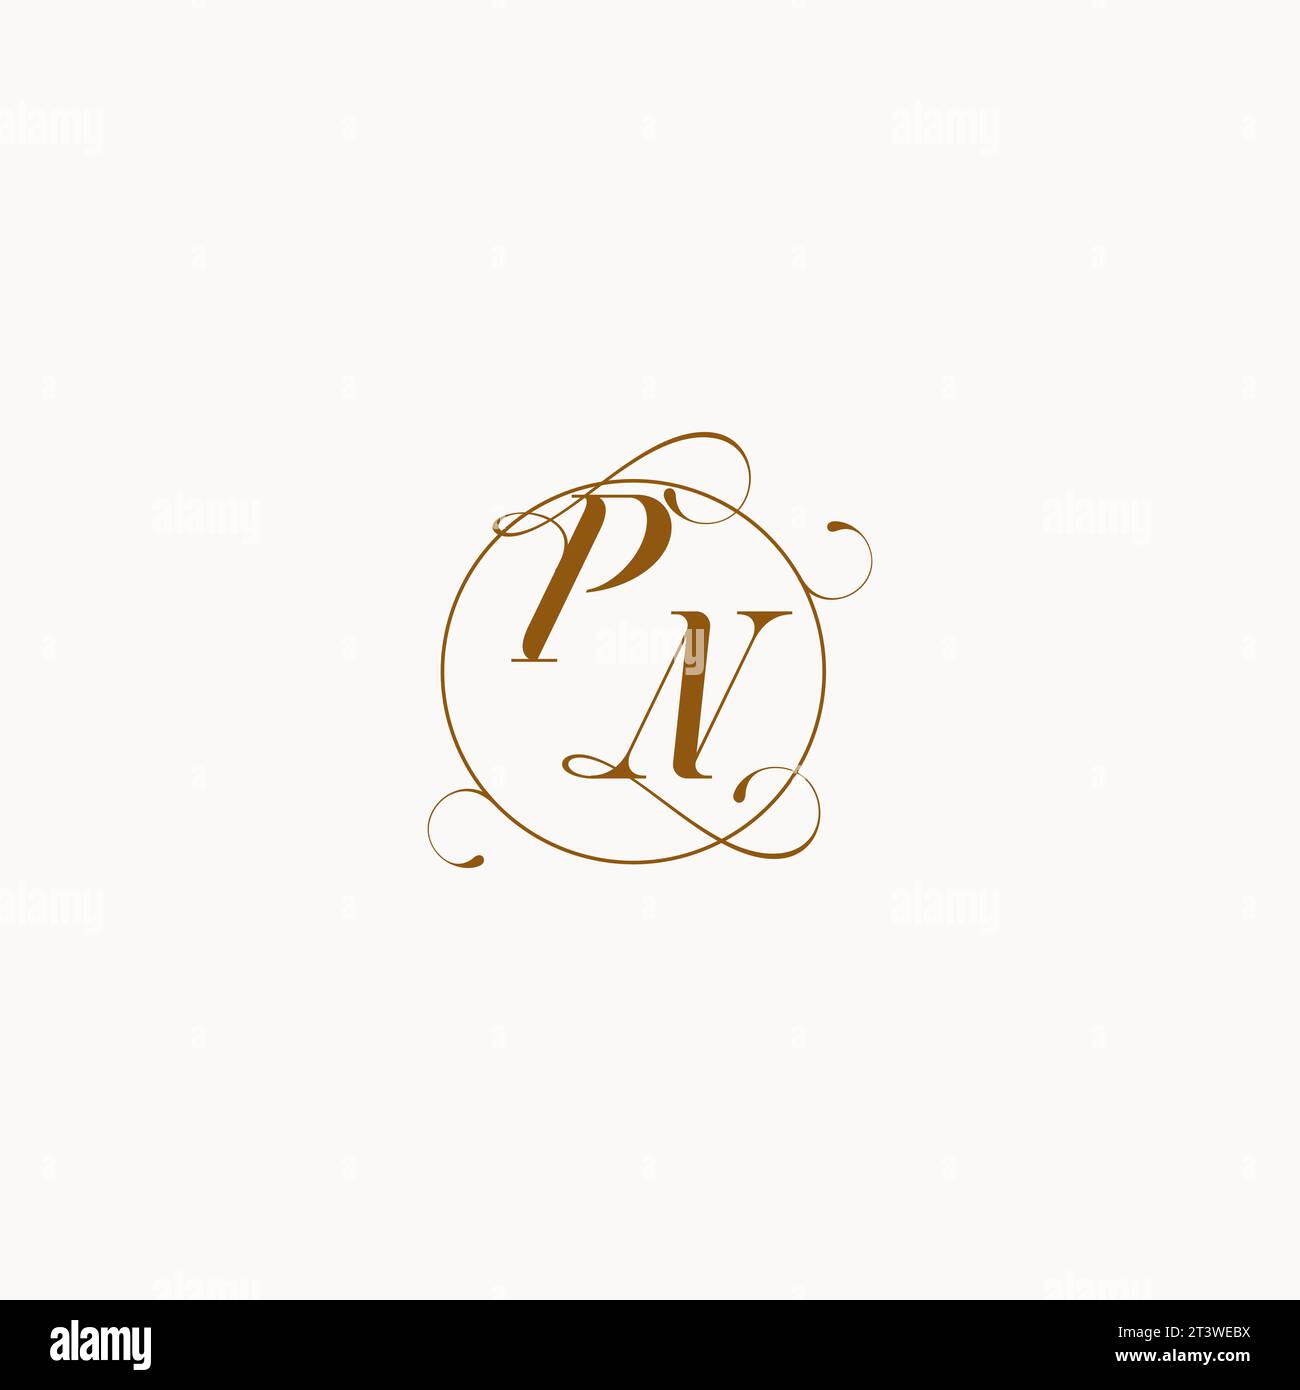 PN uniquely wedding logo symbol of your marriage and you can use it on your wedding stationary Stock Vector